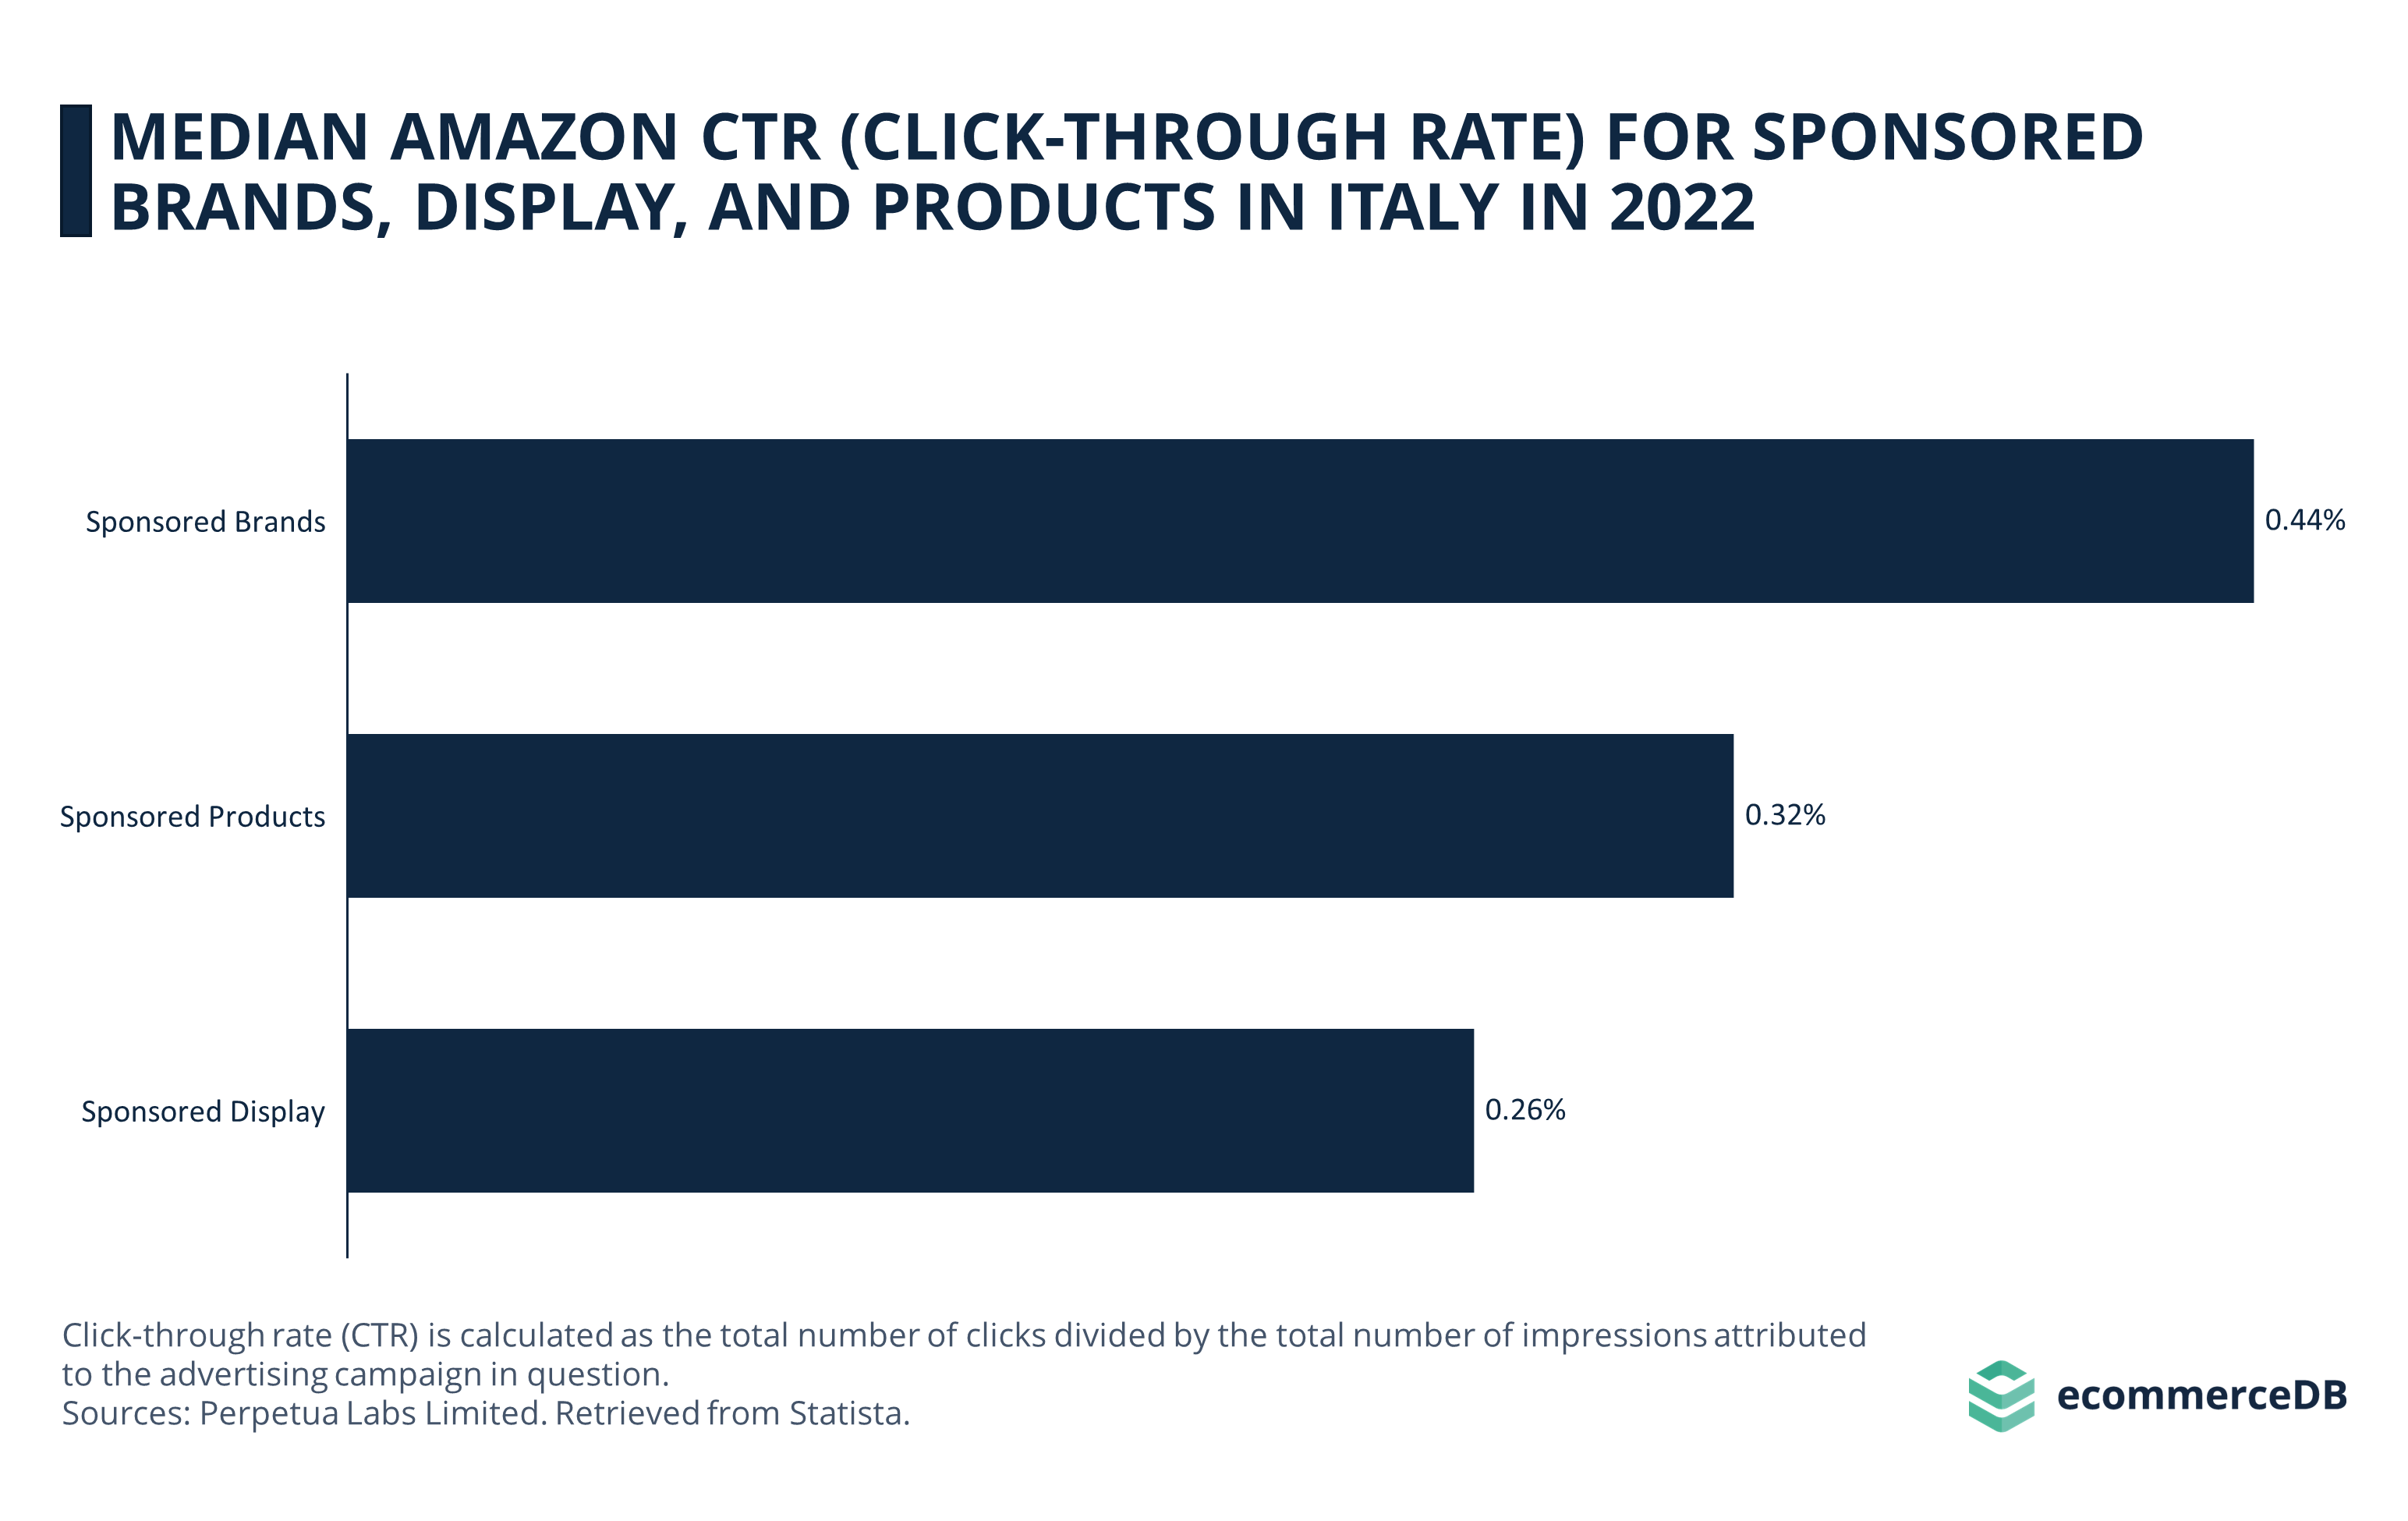 Median Amazon CTR for 3 Ad Types in Italy